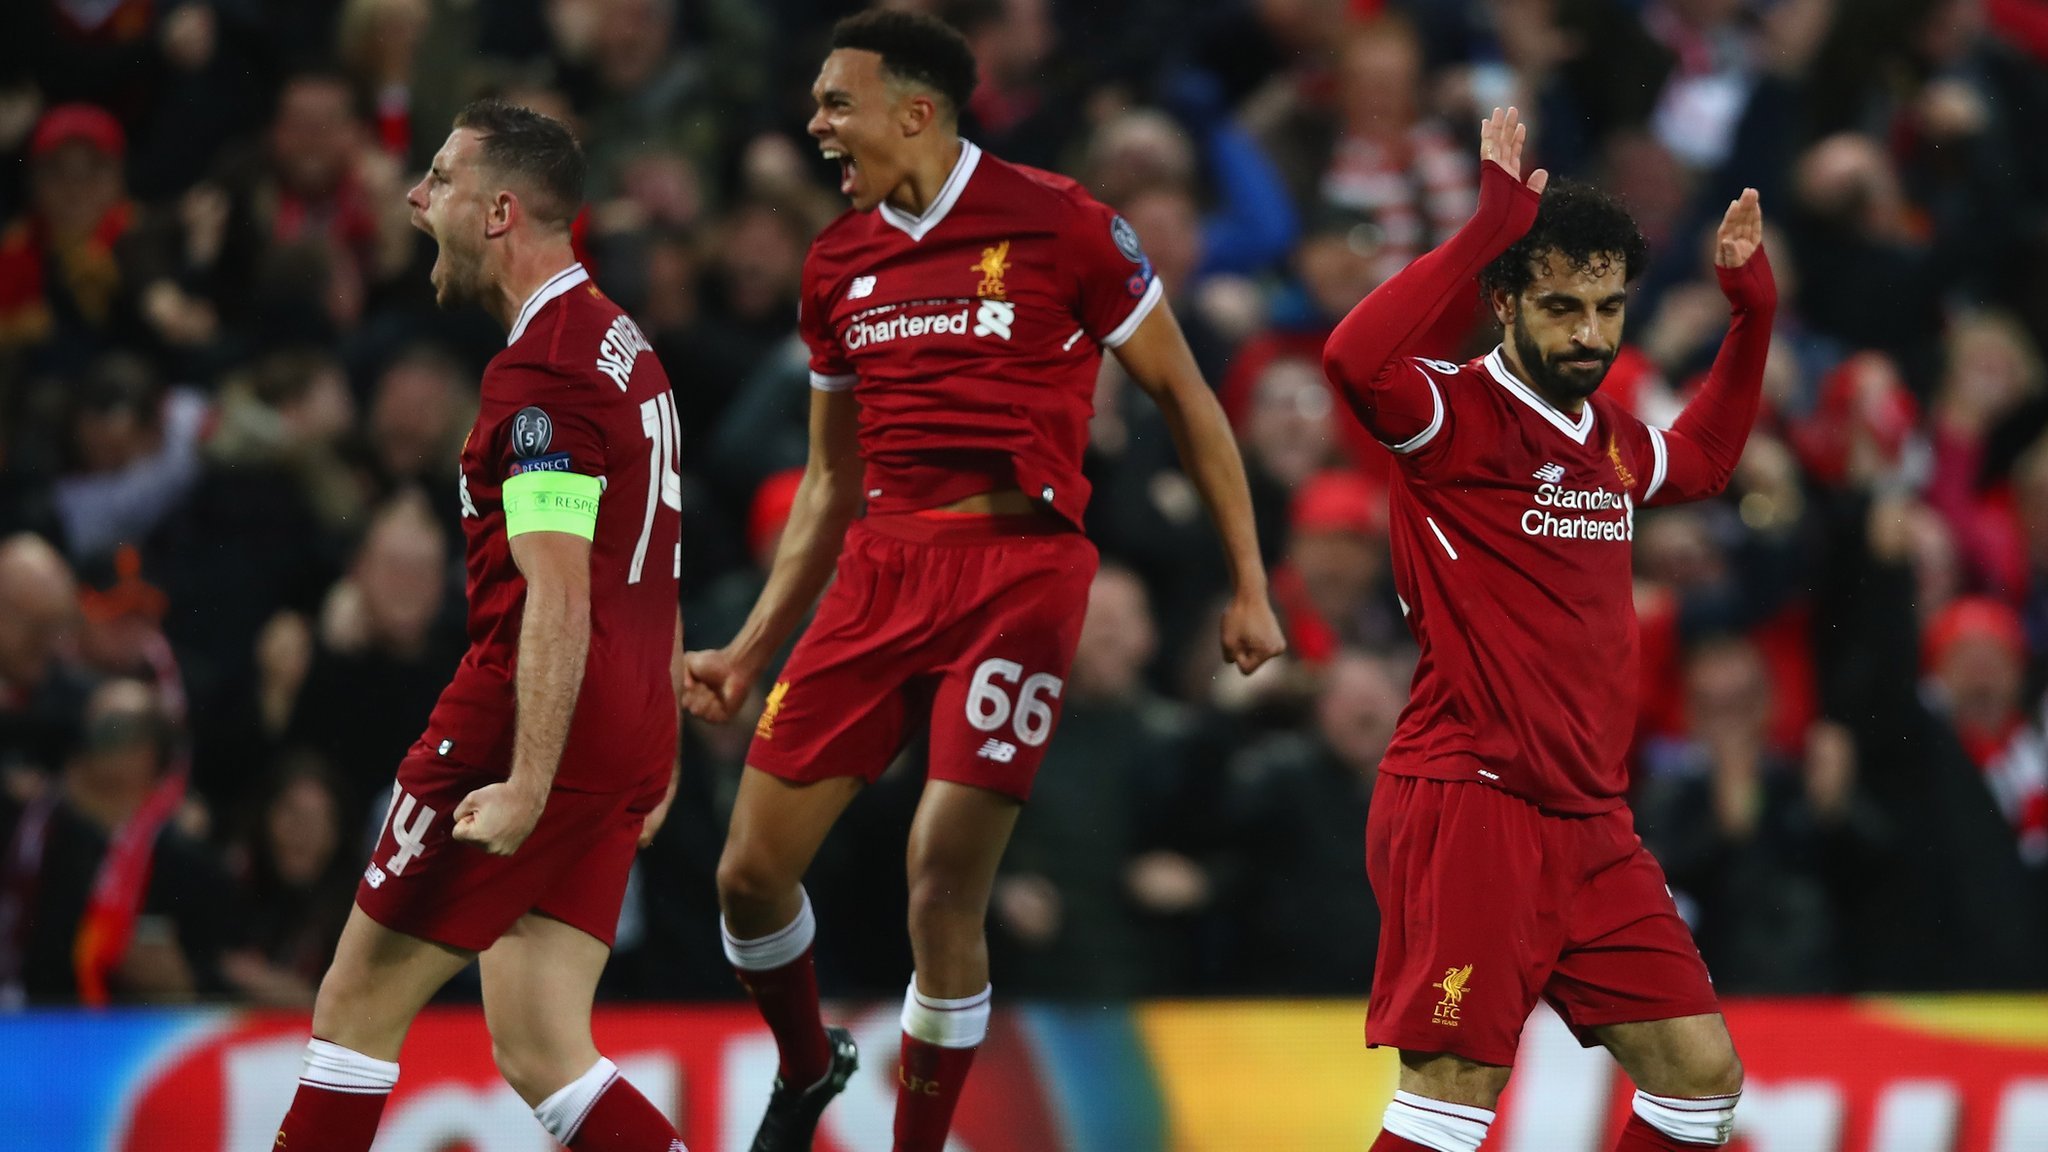 Champions League: How well have Liverpool done so far in the competition? - CBBC Newsround2048 x 1152